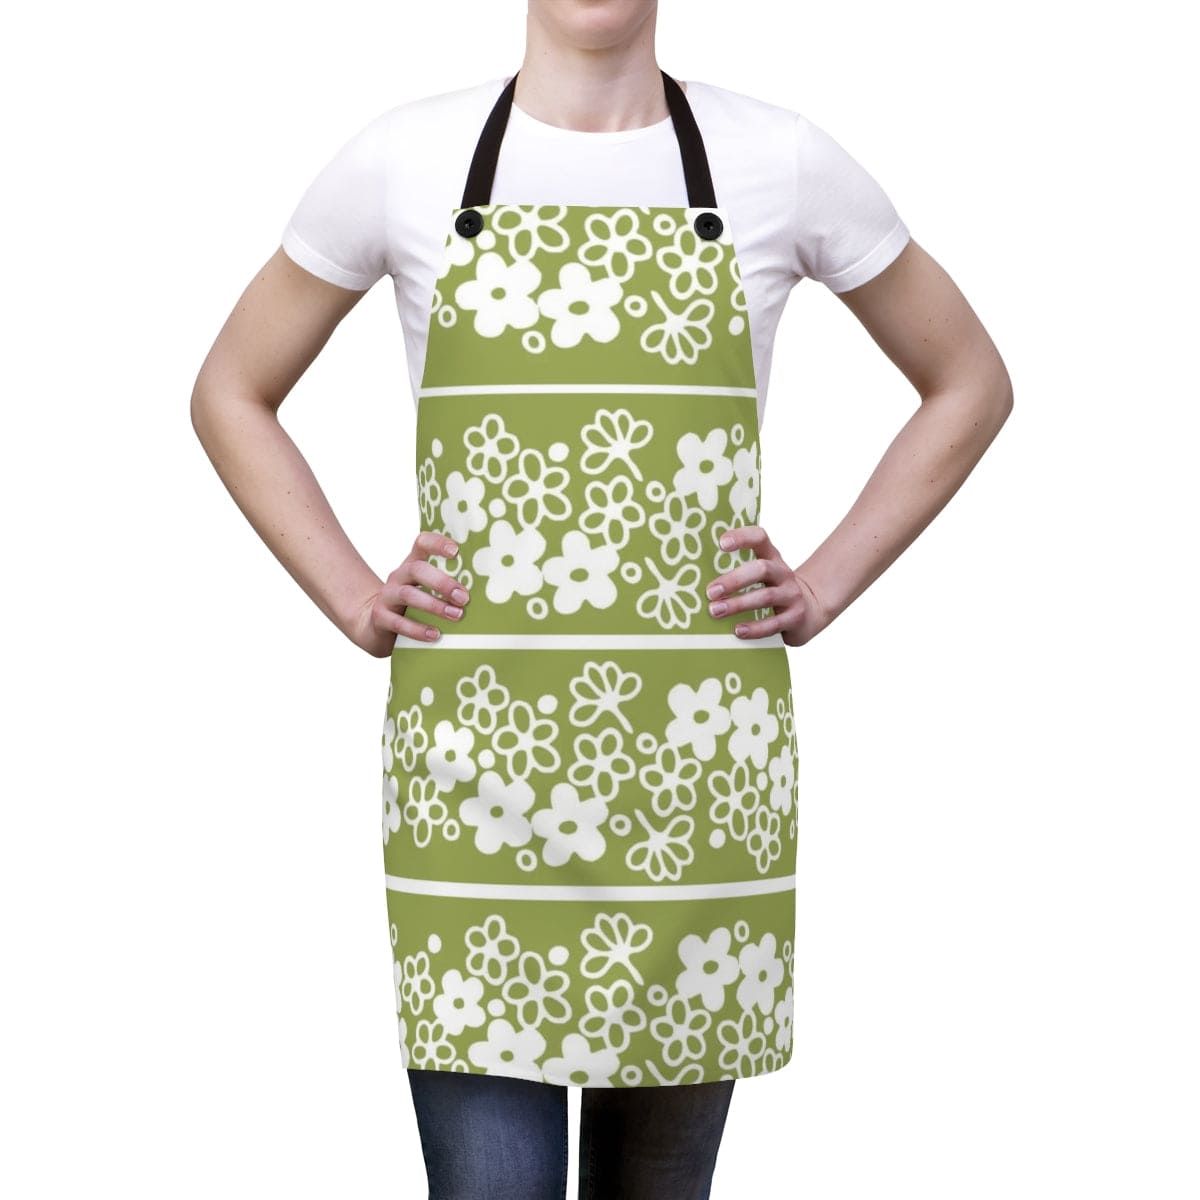 Vintage Green, Sun Blossom Pyrex Lover, Collector, Retro Mod Daisy Apron Gift For Her Accessories One Size